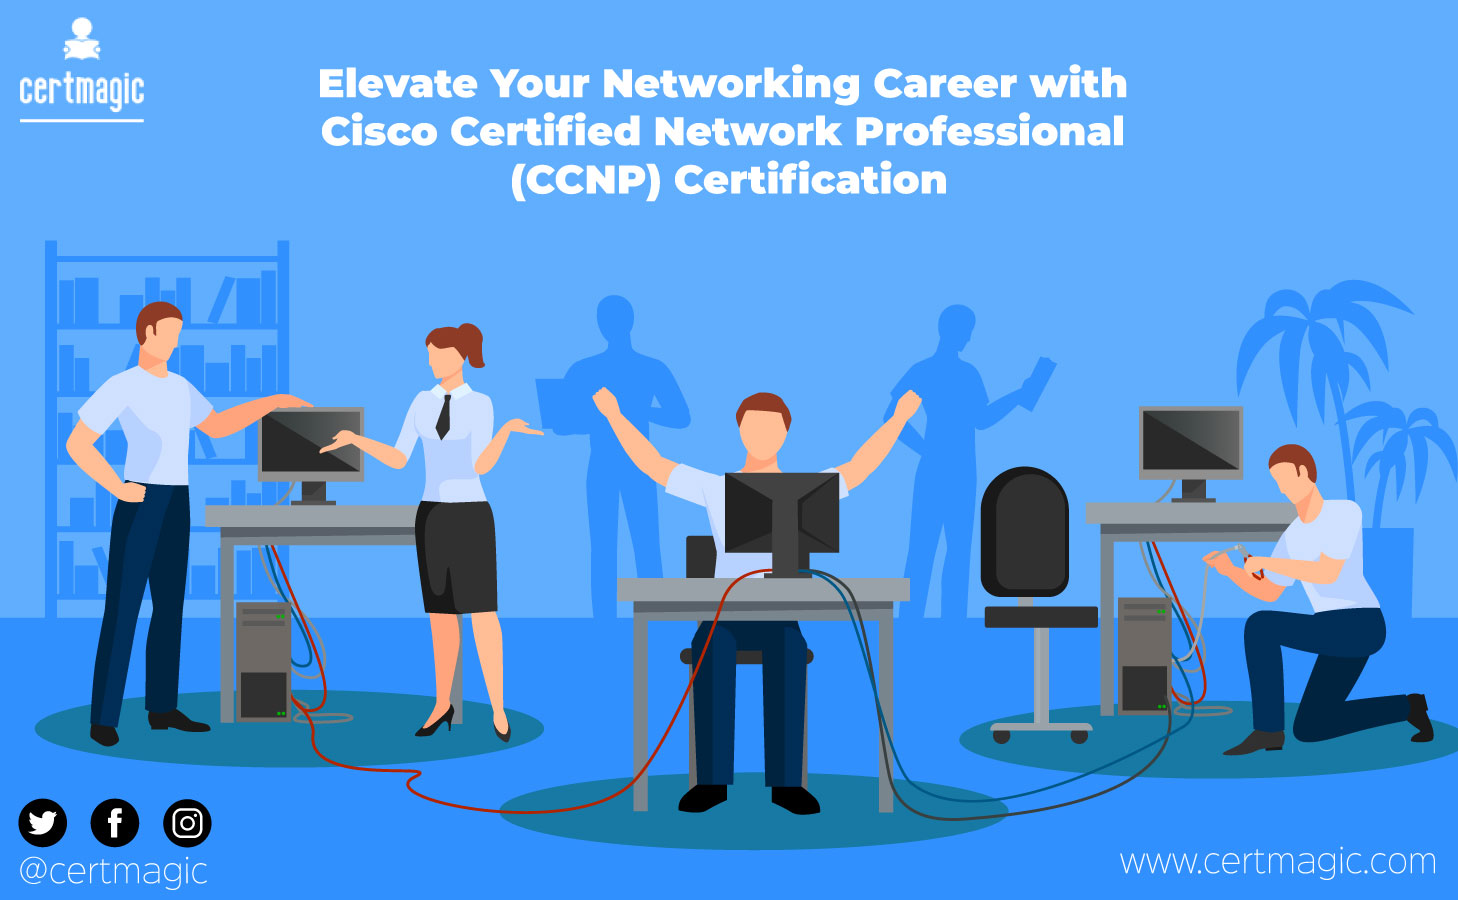 Elevate Your Networking Career with Cisco Certified Network Professional (CCNP) Certification